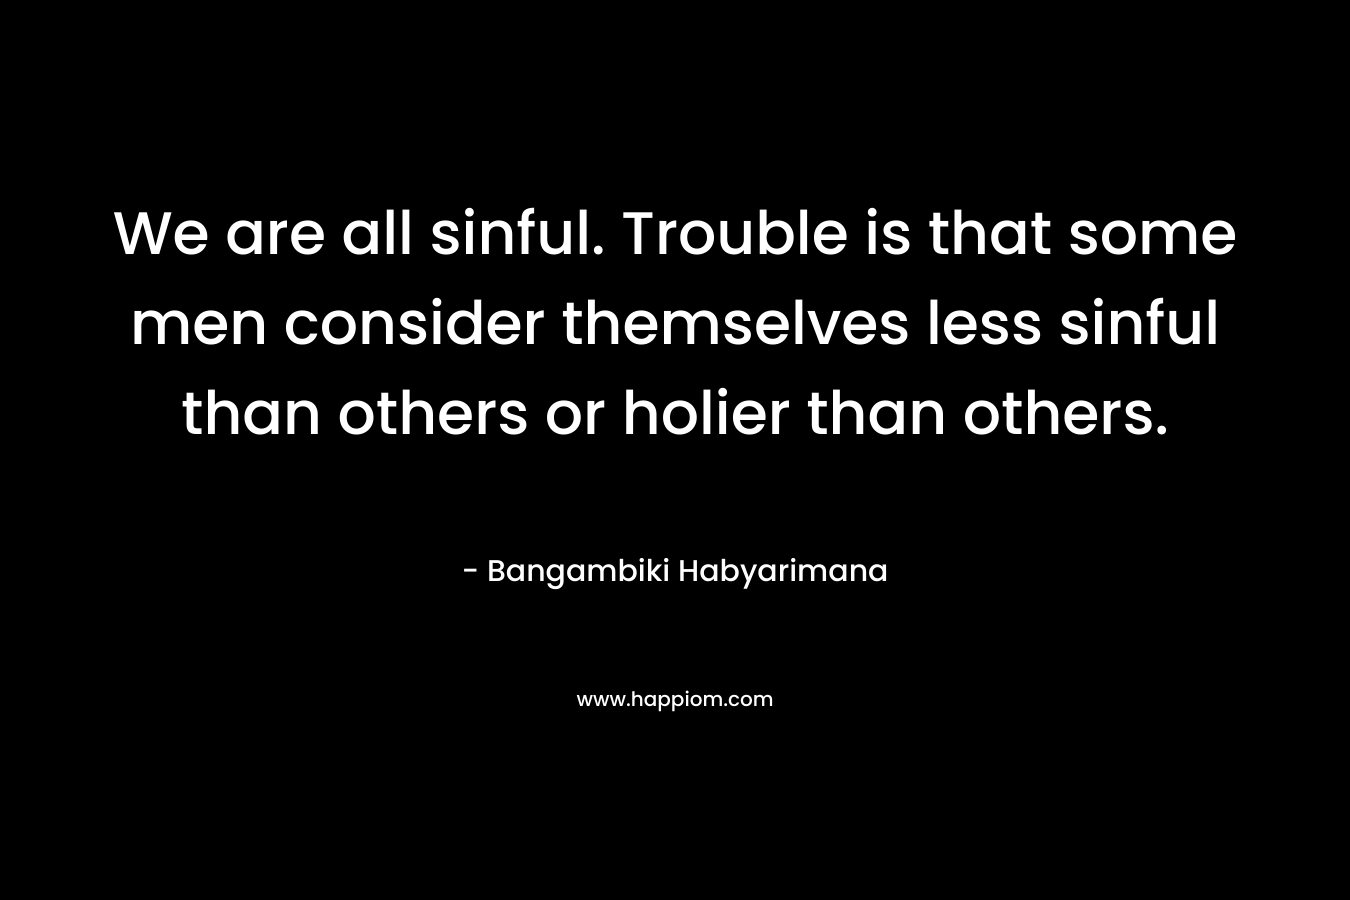 We are all sinful. Trouble is that some men consider themselves less sinful than others or holier than others. – Bangambiki Habyarimana